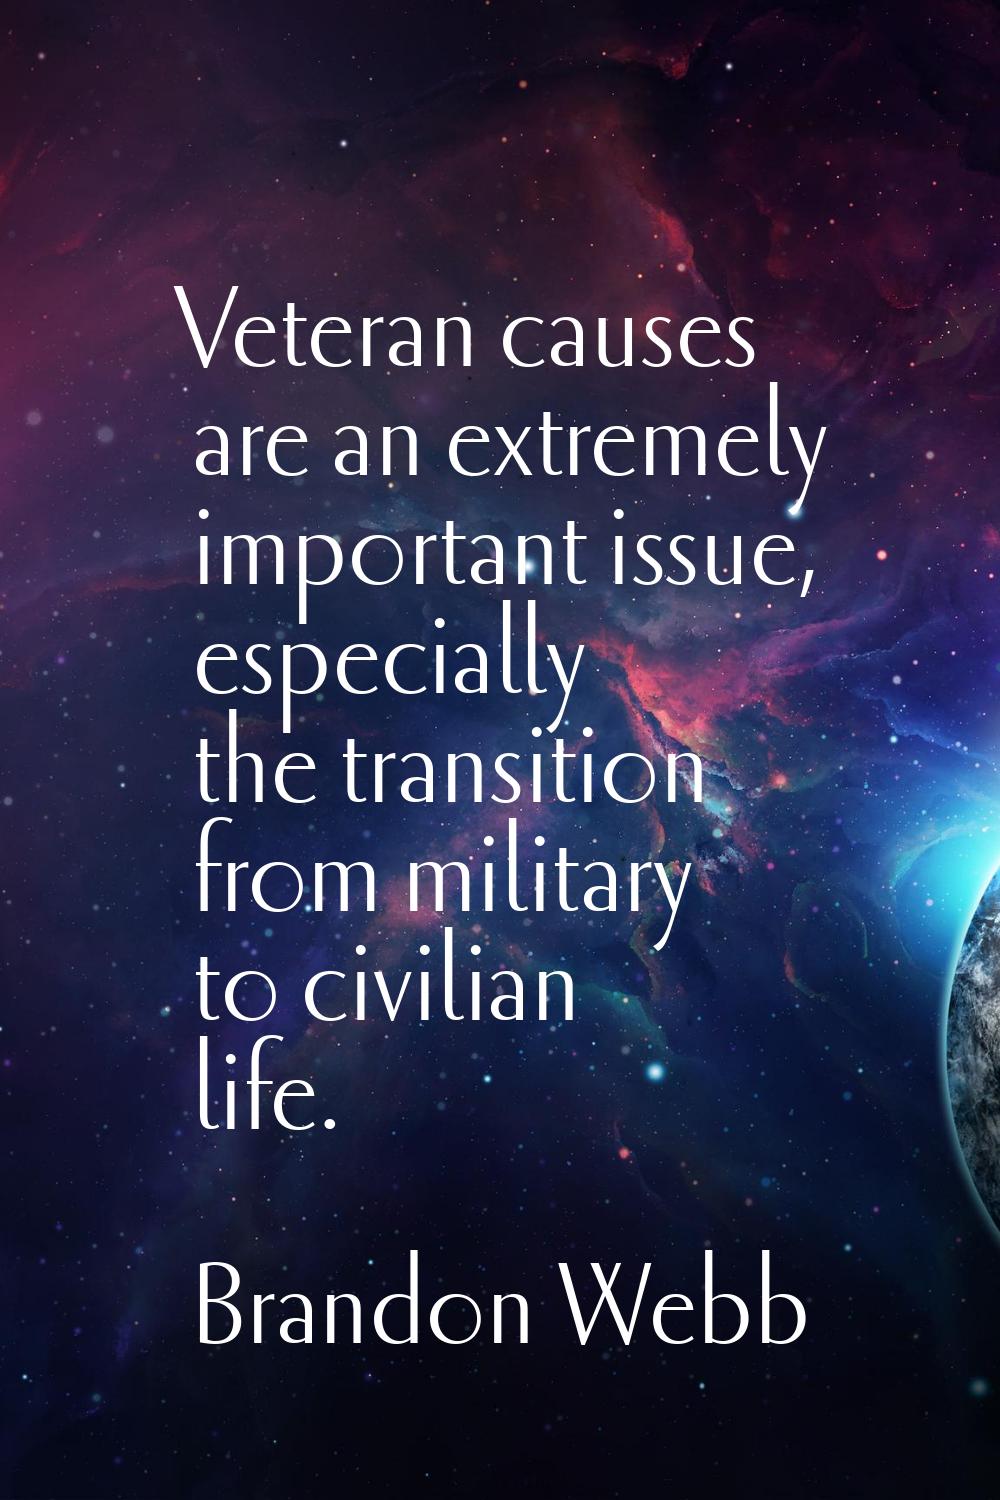 Veteran causes are an extremely important issue, especially the transition from military to civilia